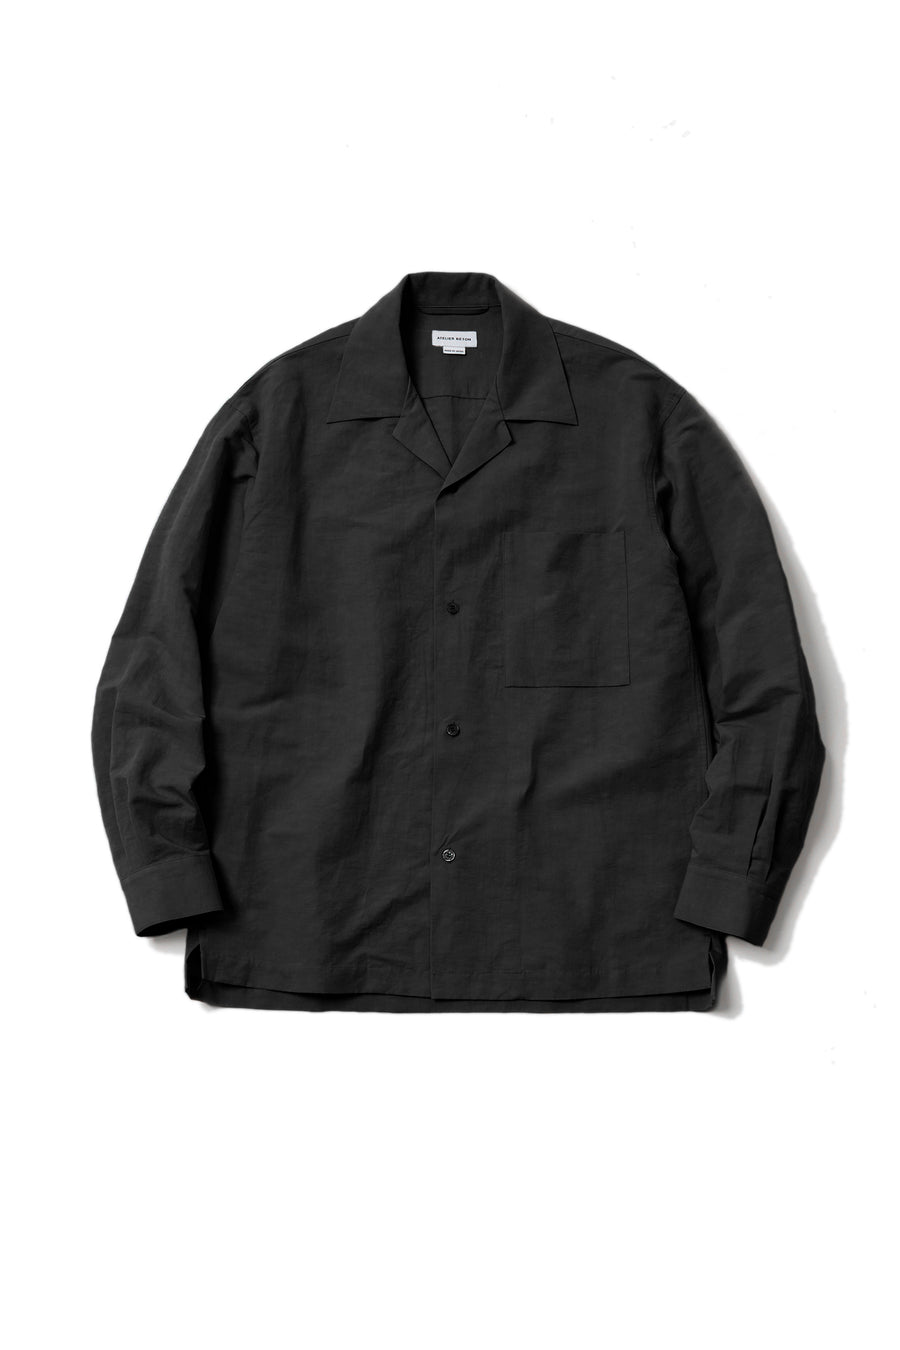 221-17H HIGH COUNT WEATHER OPEN COLLAR SHIRT IN BLACK